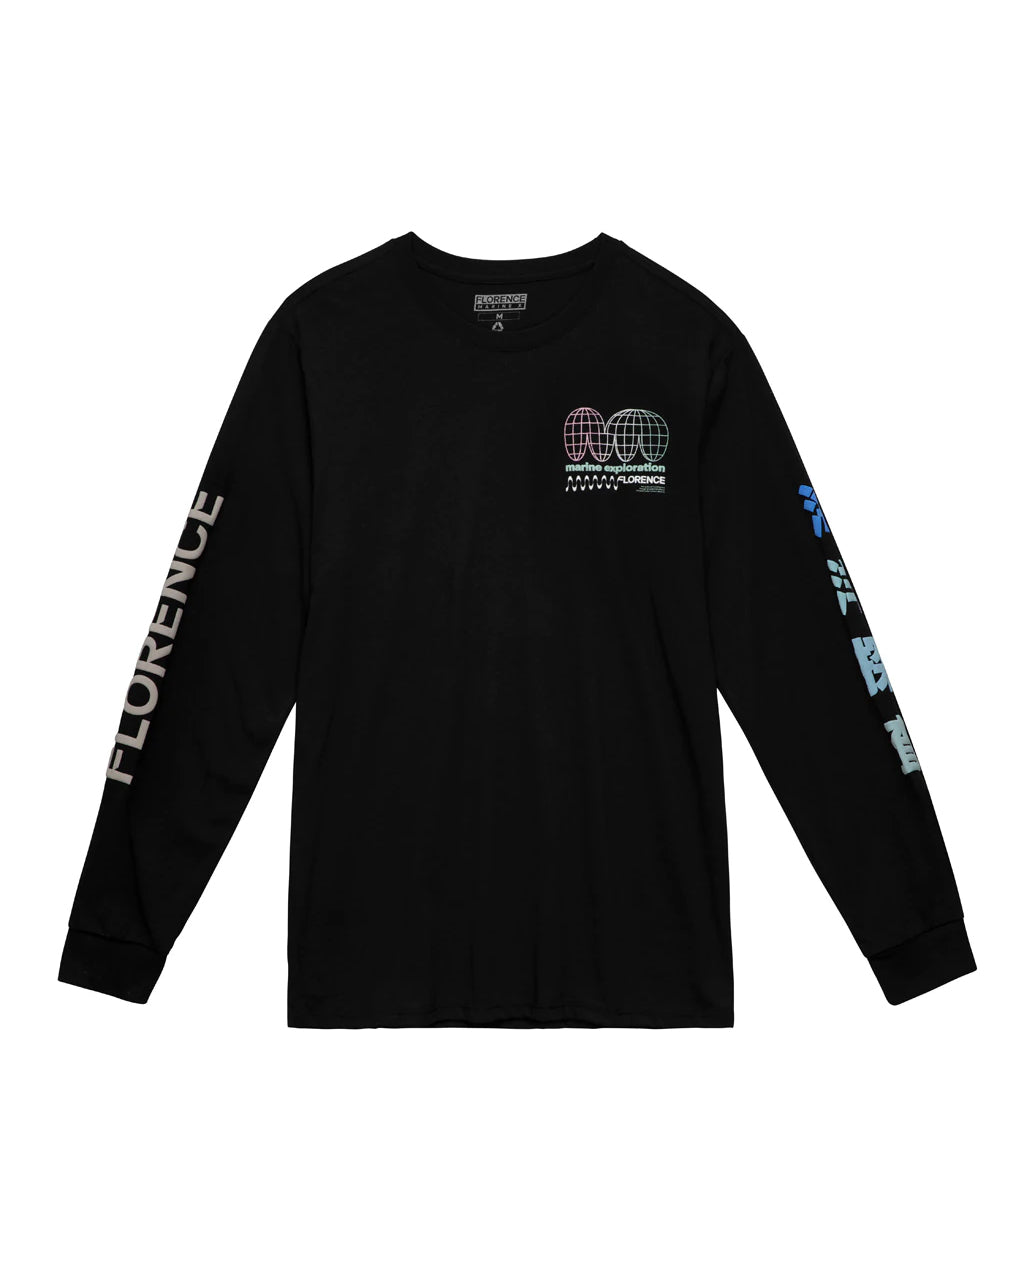 Florence Marine X Frontier Recover LS T-Shirt Black L